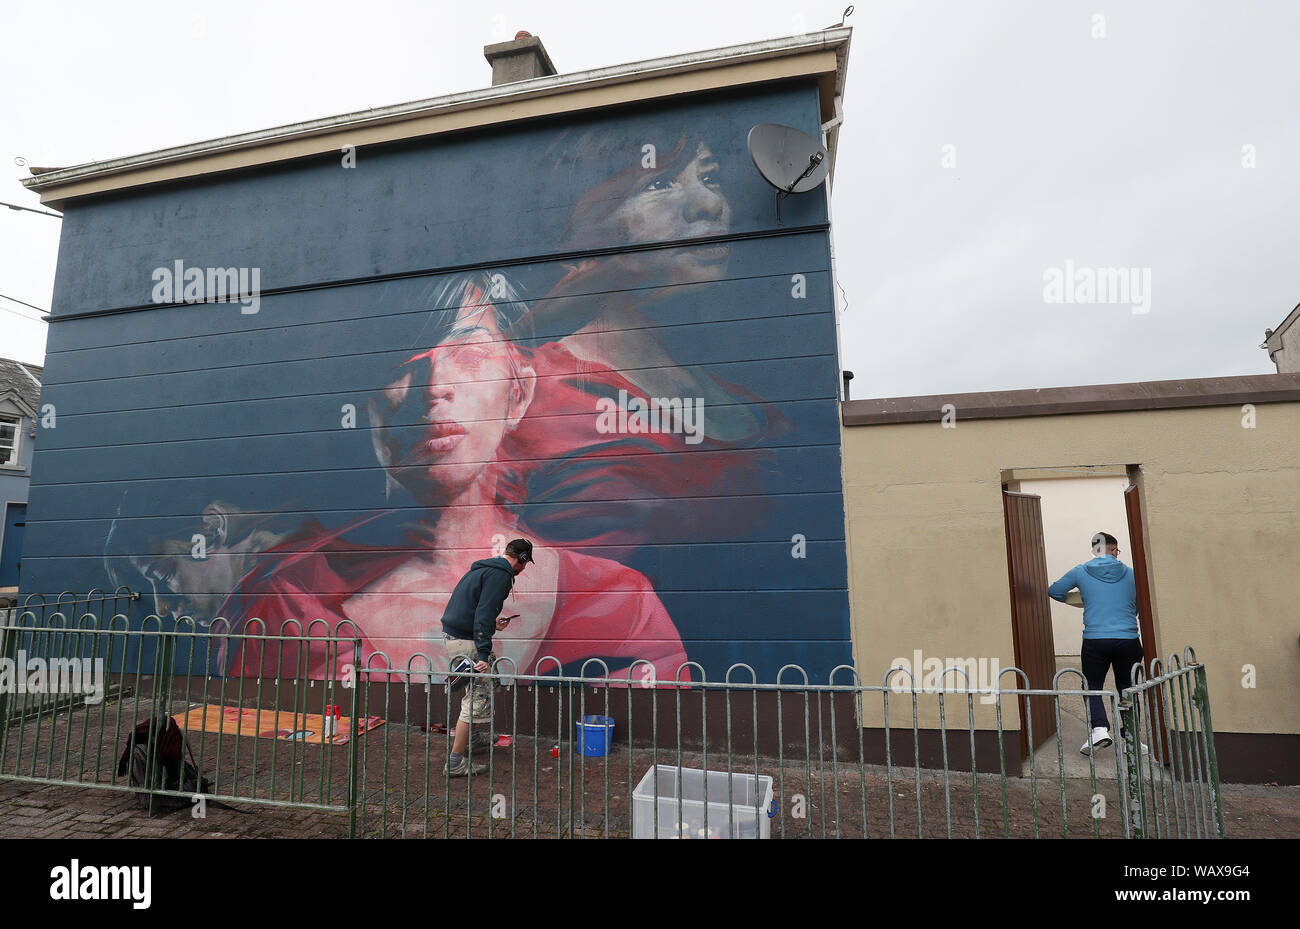 Artist Spear works on a mural titled 'Karelis' which forms part of the Waterford Walls graffiti and street art festival taking place between 22 and 25 August in Waterford city, Ireland. Stock Photo